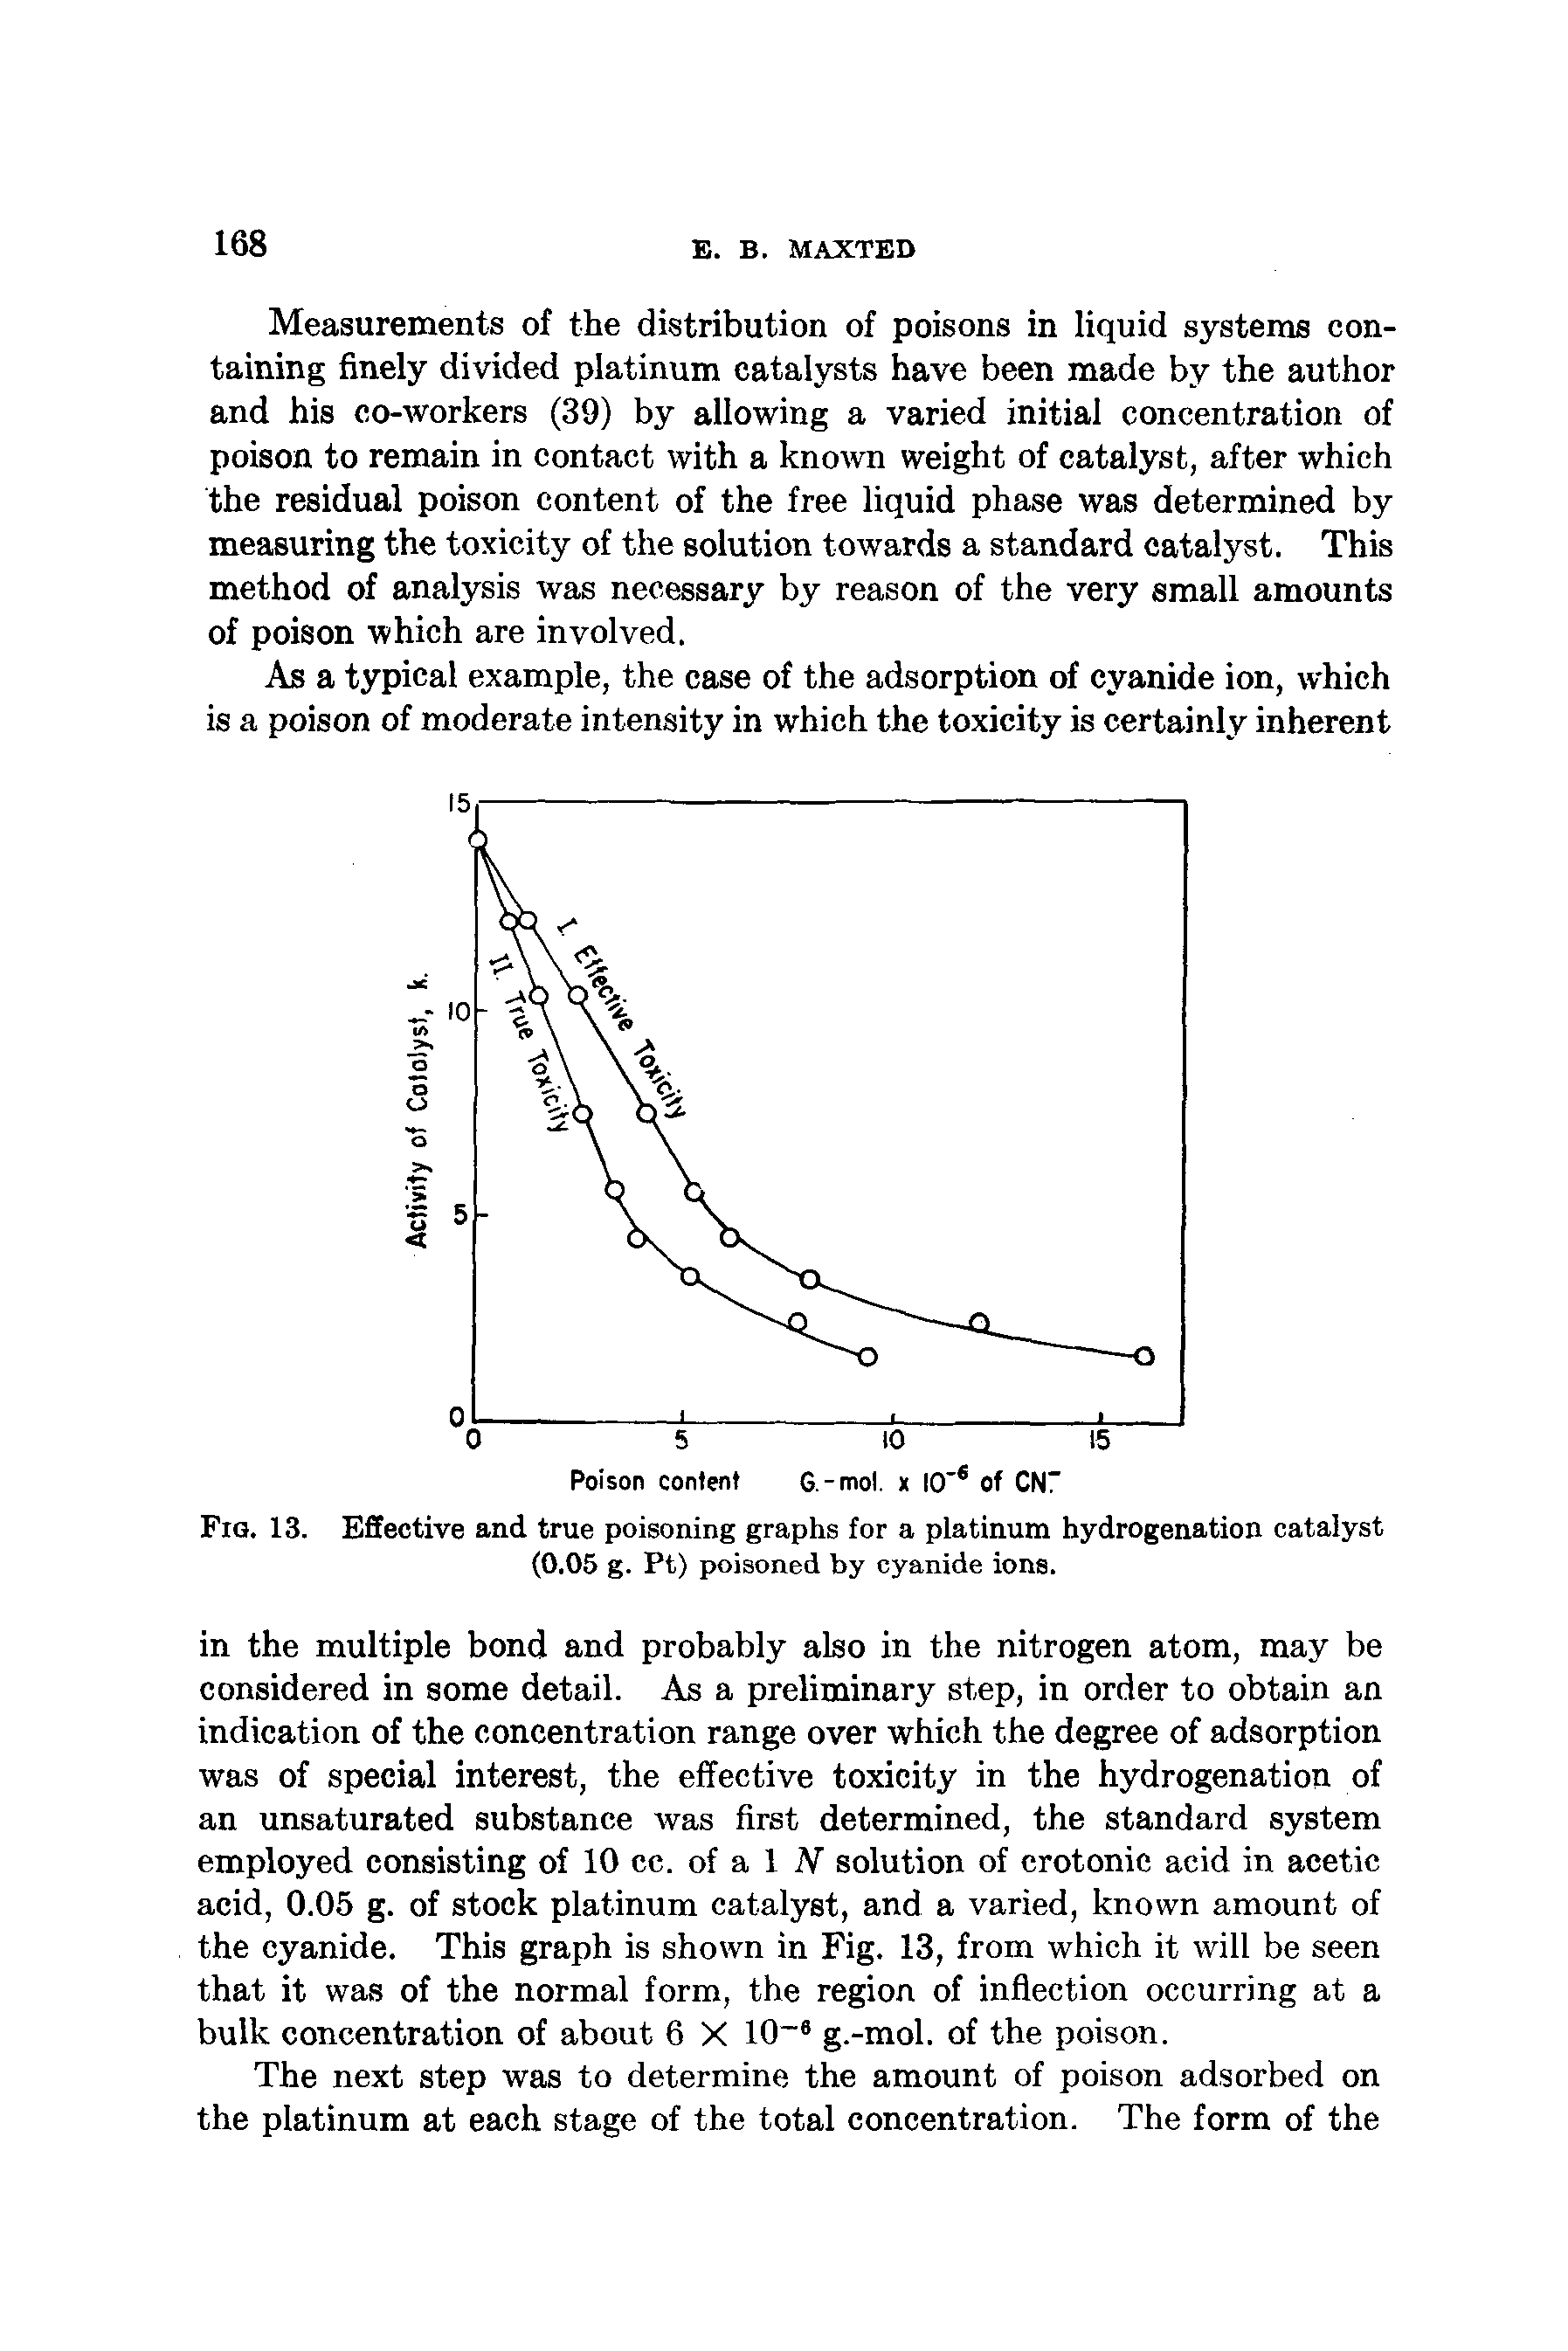 Fig. 13. Effective and true poisoning graphs for a platinum hydrogenation catalyst (0.05 g. Pt) poisoned by cyanide ions.